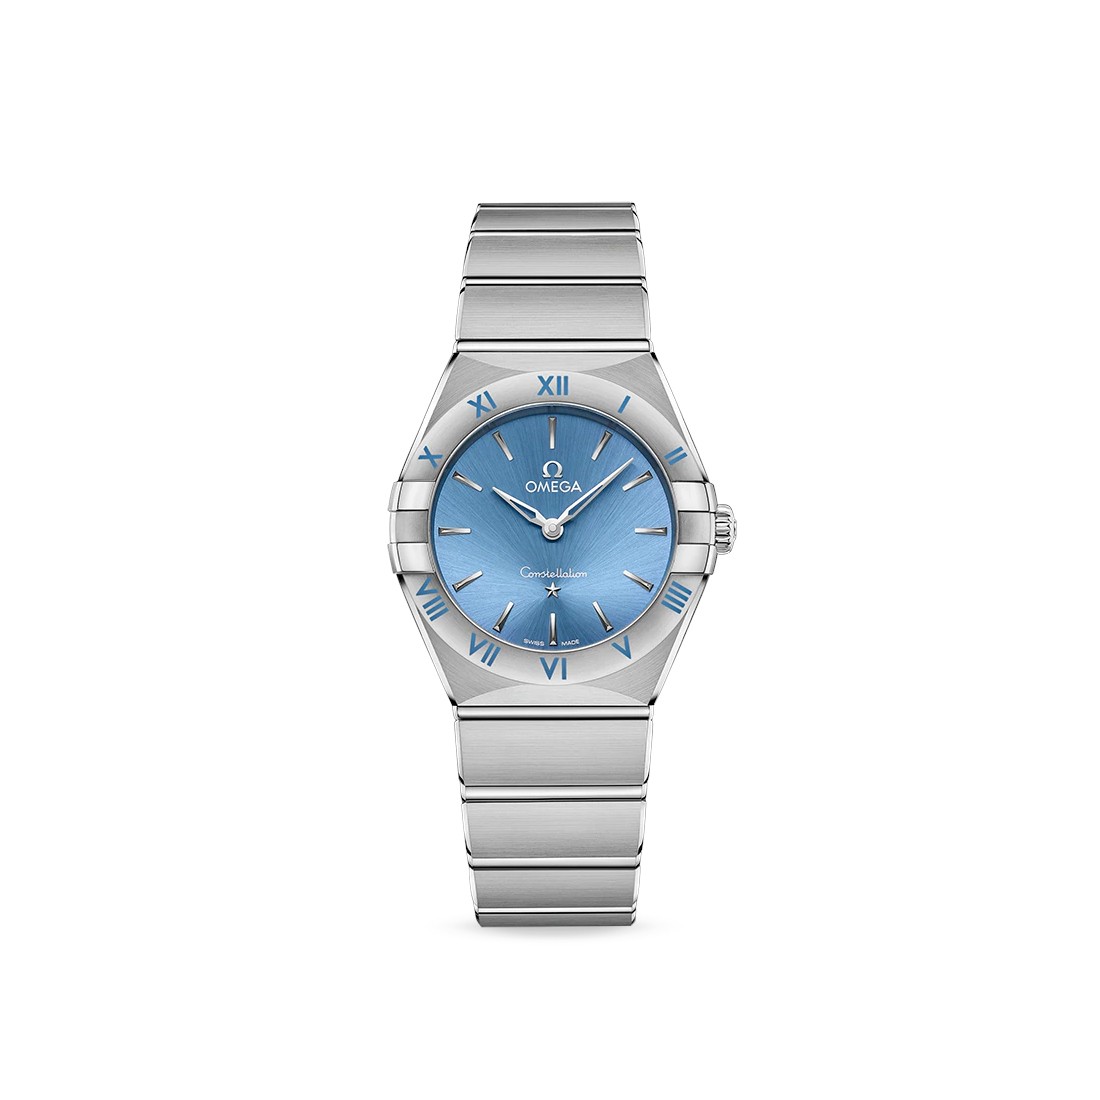 Omega Constellation Quartz 28 mm watch with light blue dial